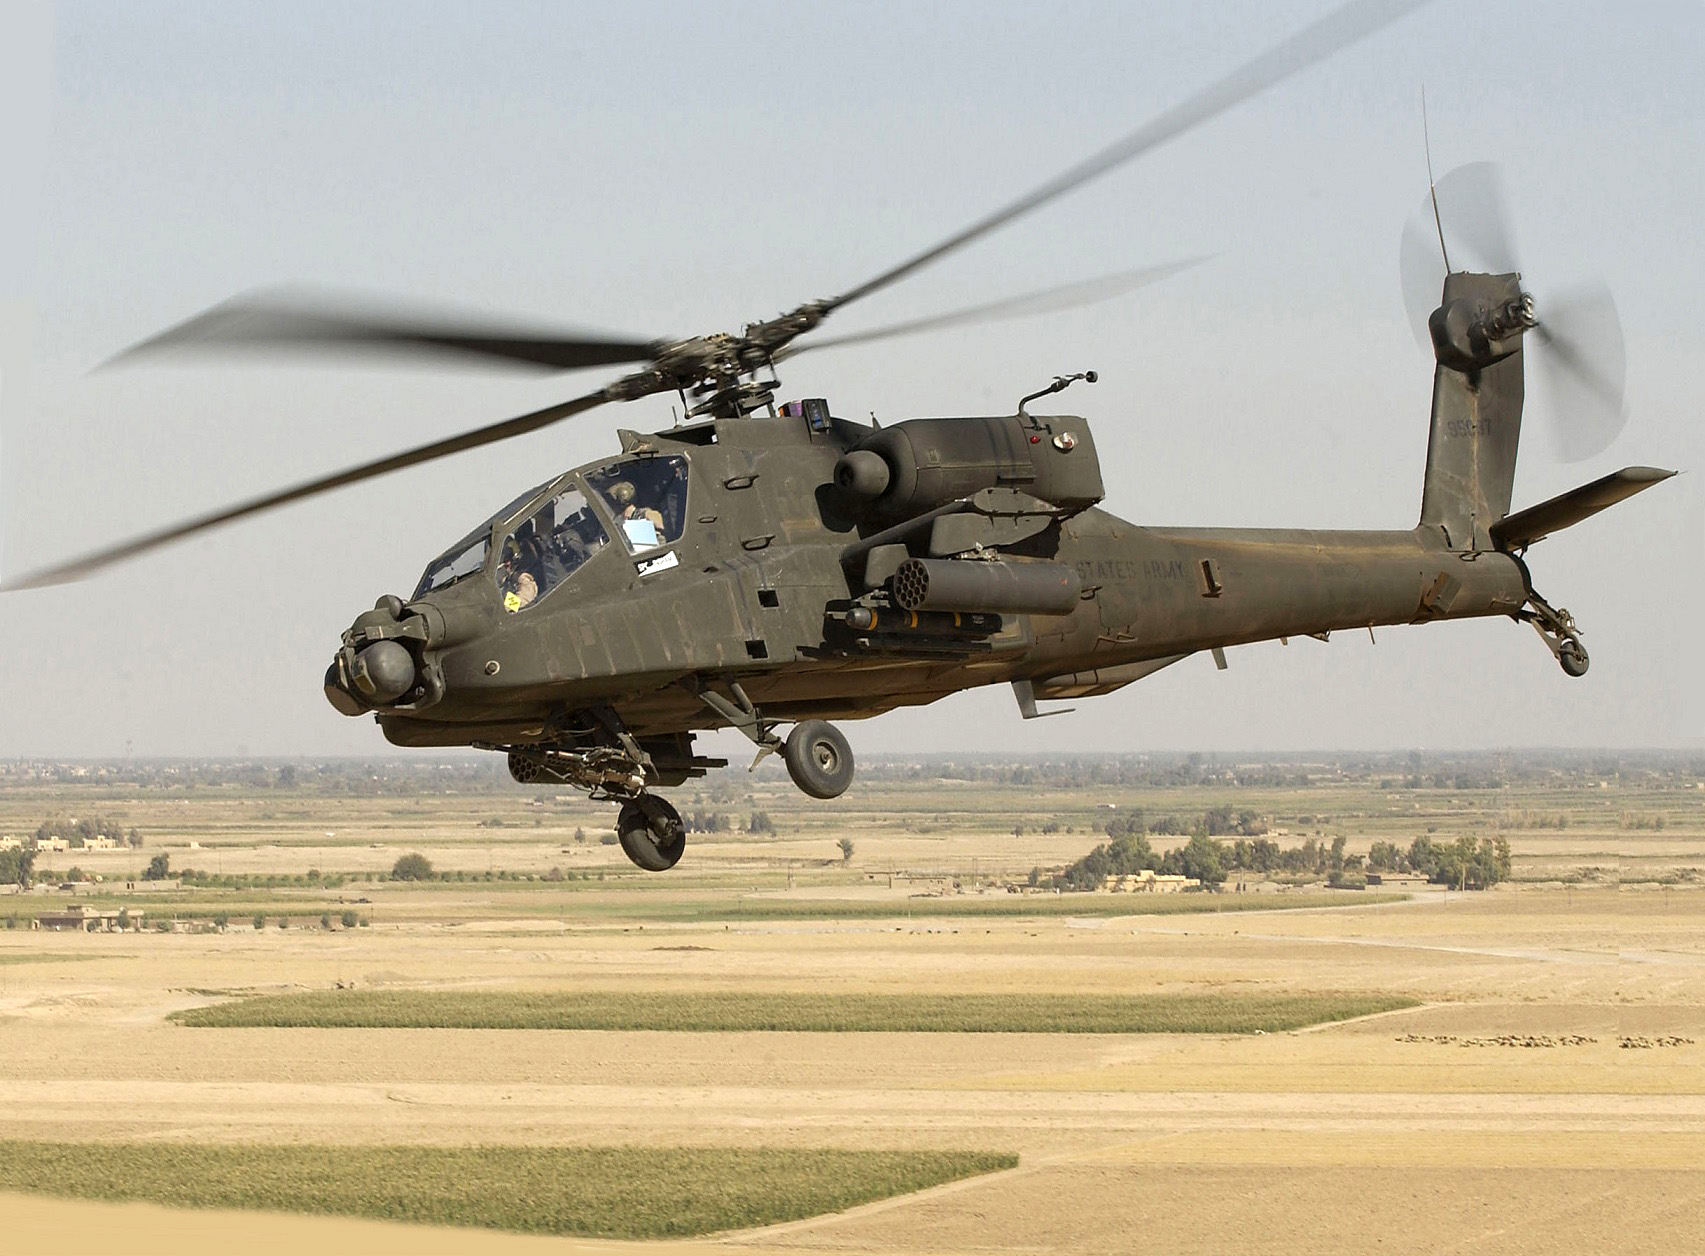 U.S. State dept nods for $3B sale of Apache Helicopters to Qatar